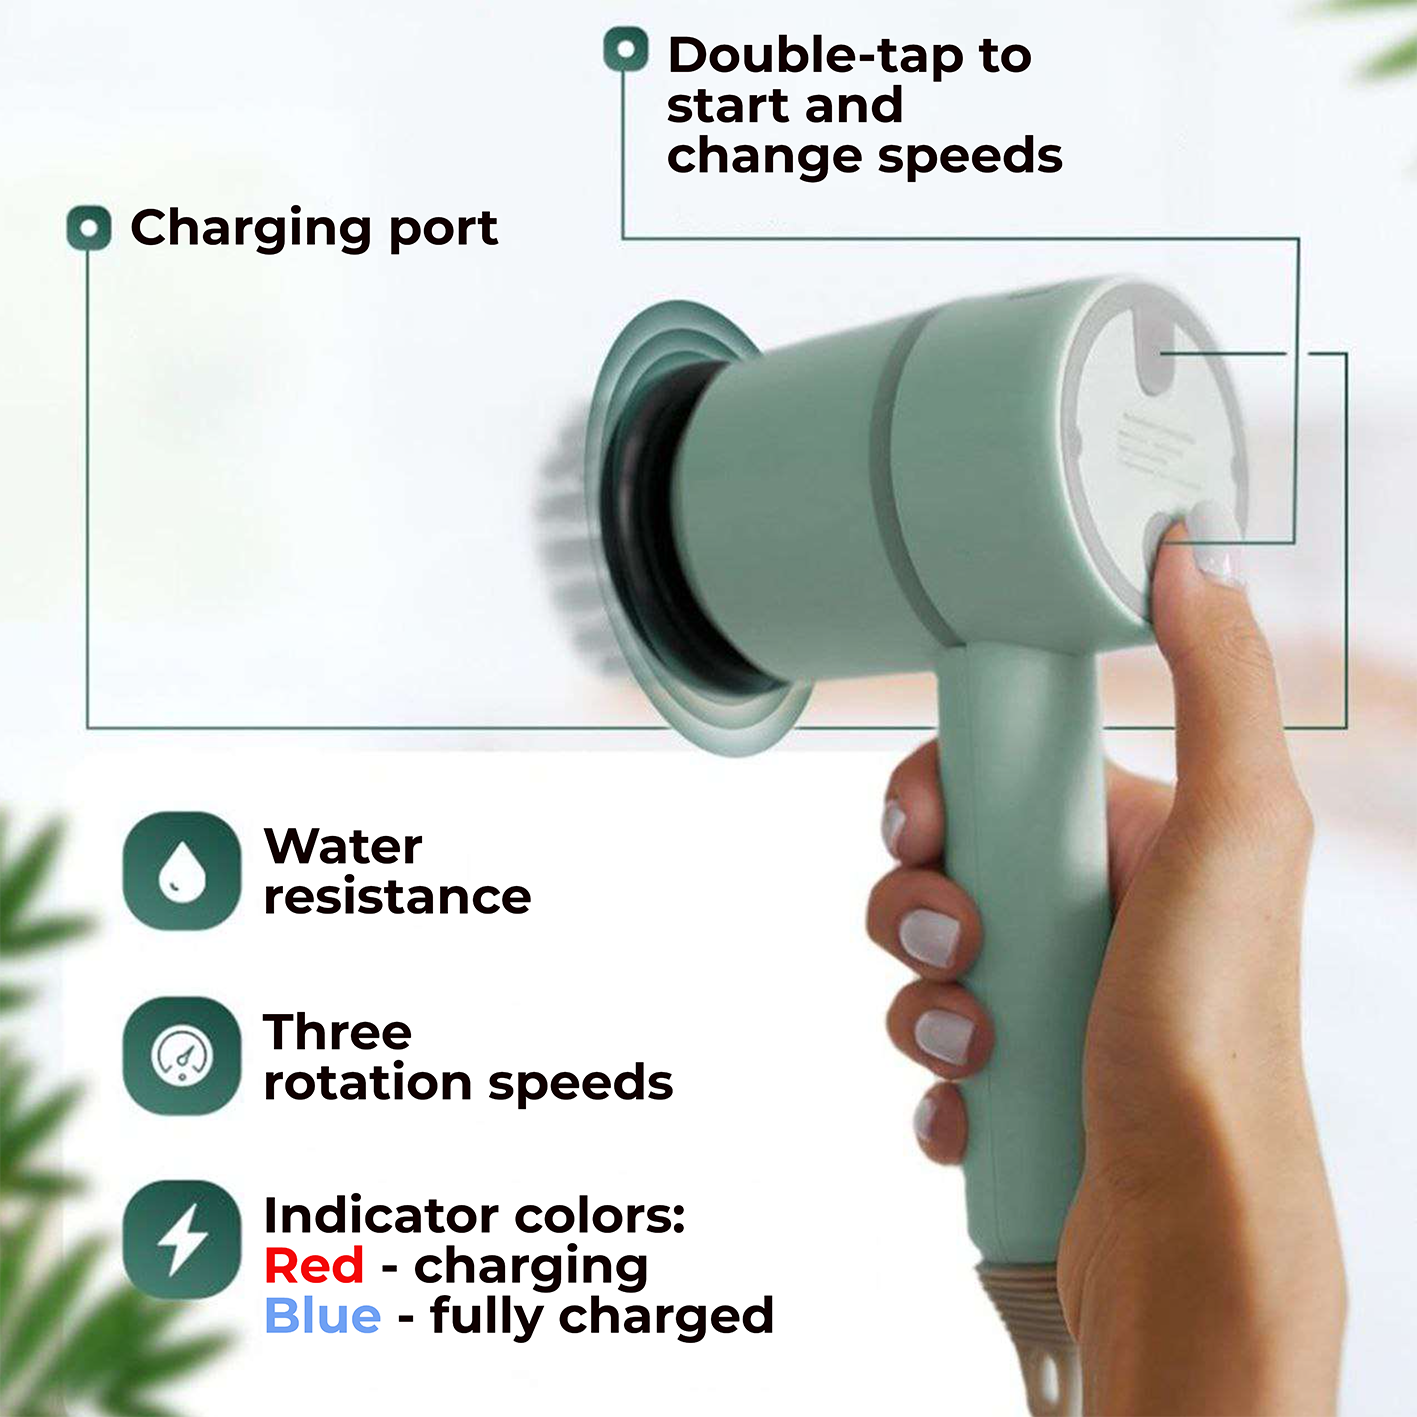 "Close-up of the SpotLess scrubber showing advanced features like water resistance, multiple speed options, and LED charging indicators"